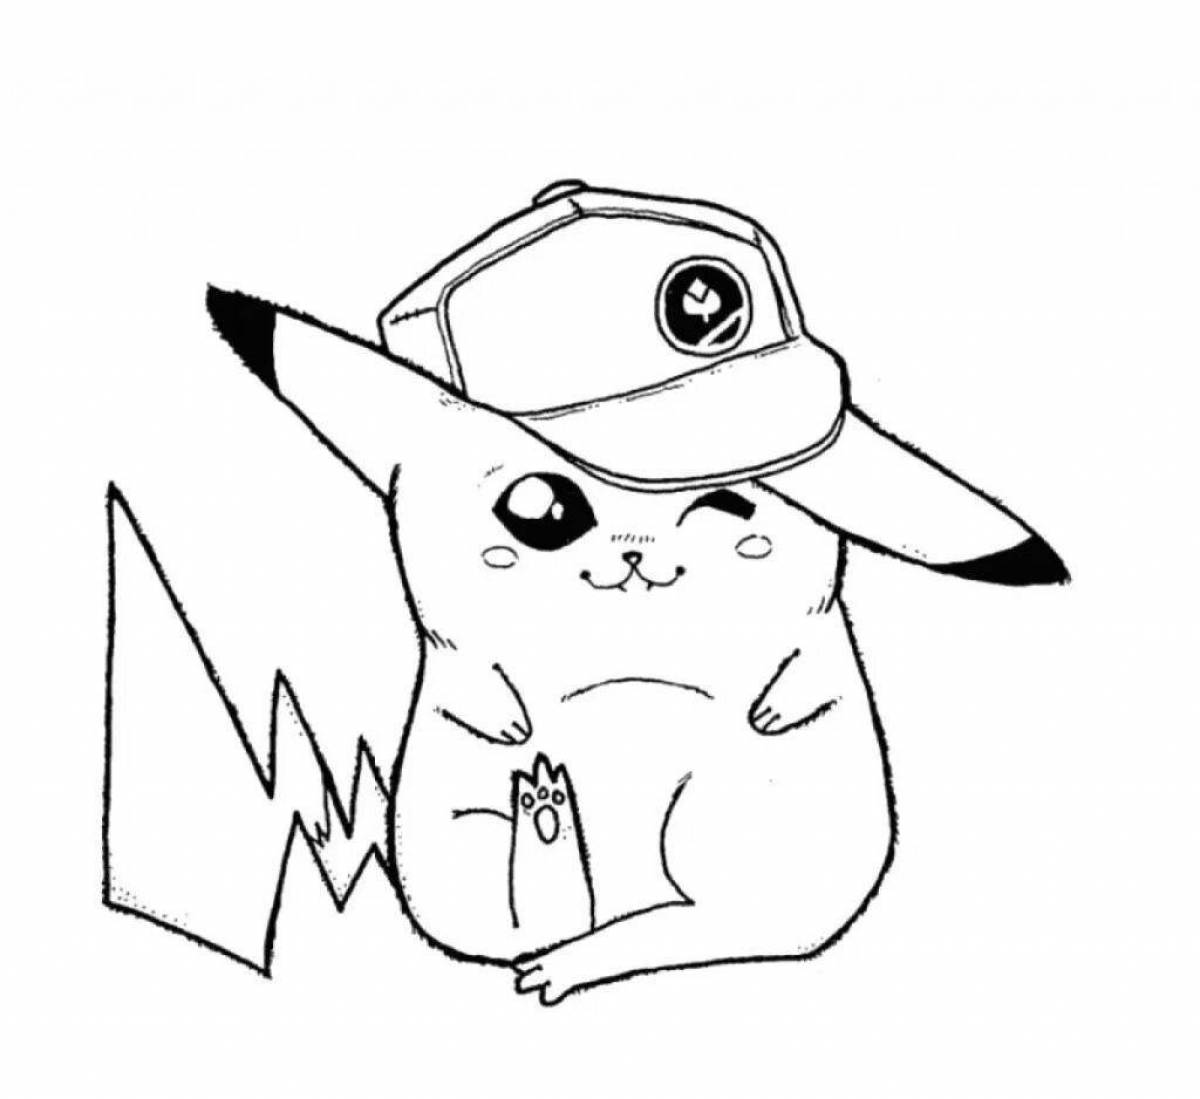 Colorful coloring of Pikachu in a cap